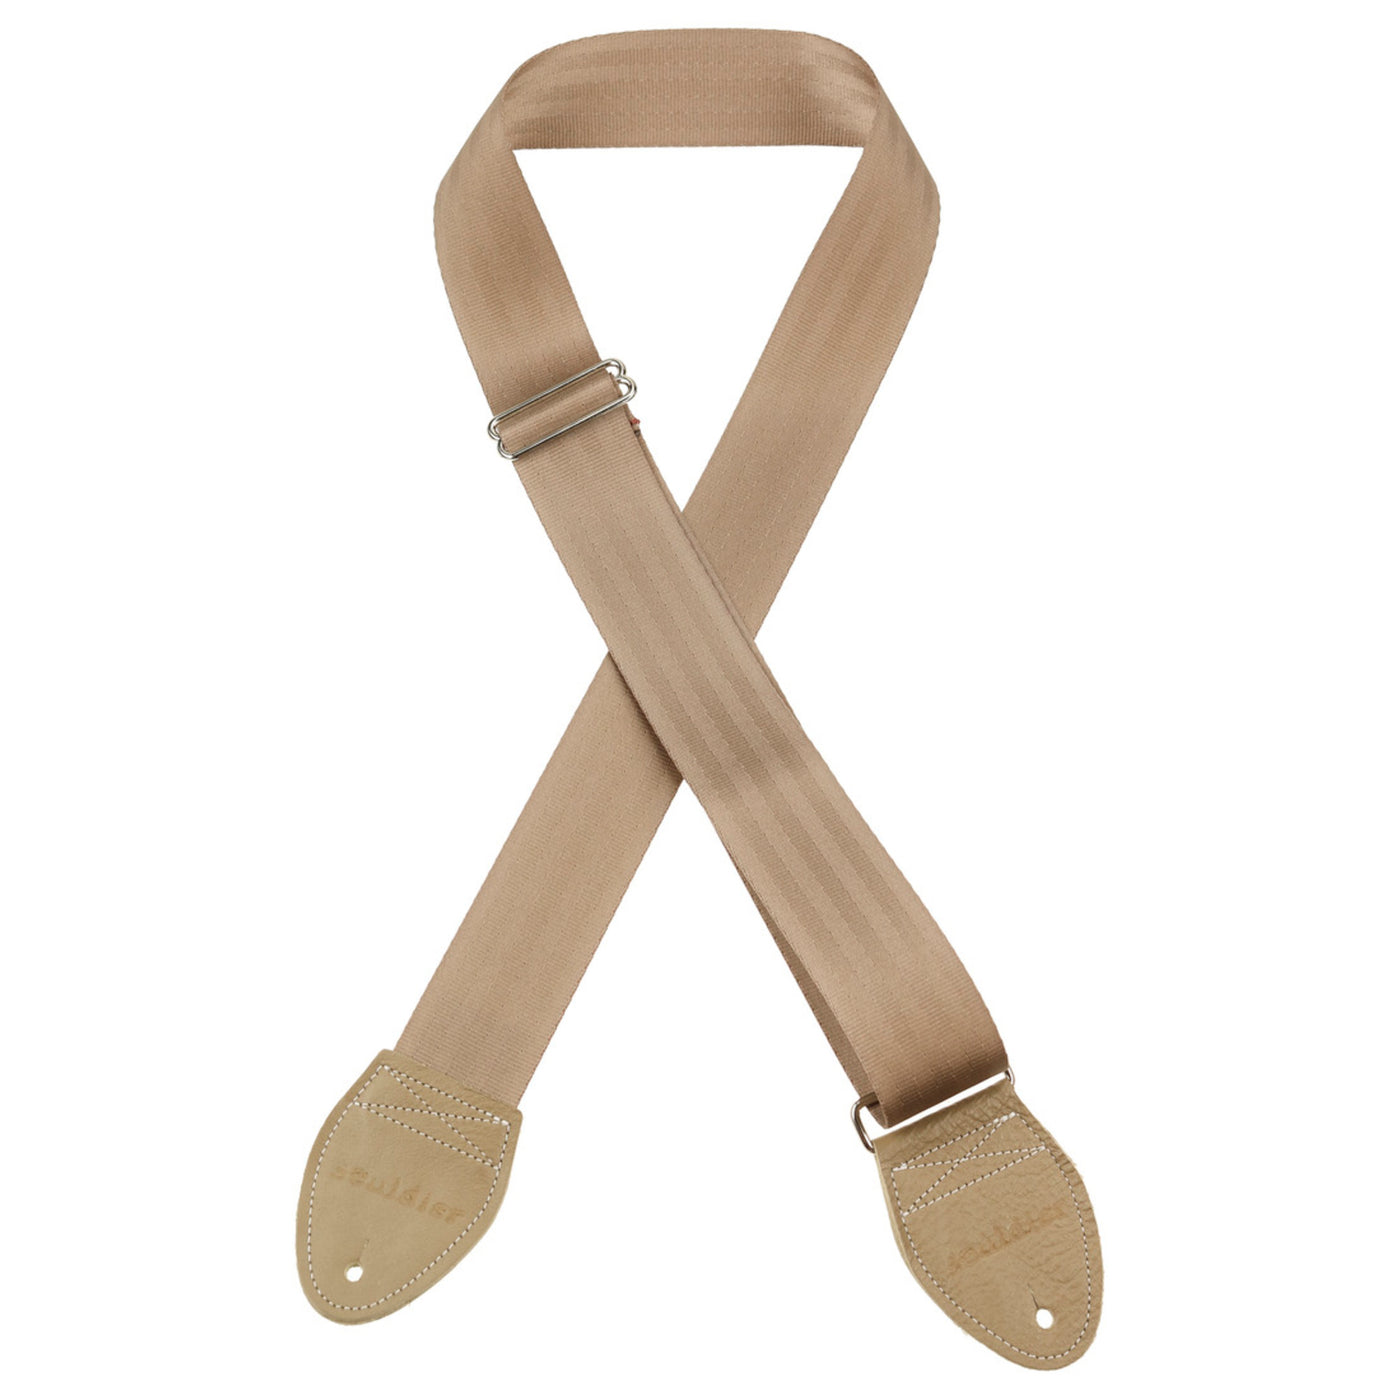 Souldier GS0000TP04TP - Handmade Seatbelt Guitar Strap for Bass, Electric or Acoustic Guitar, 2 Inches Wide and Adjustable Length from 30" to 63"  Made in the USA, Taupe